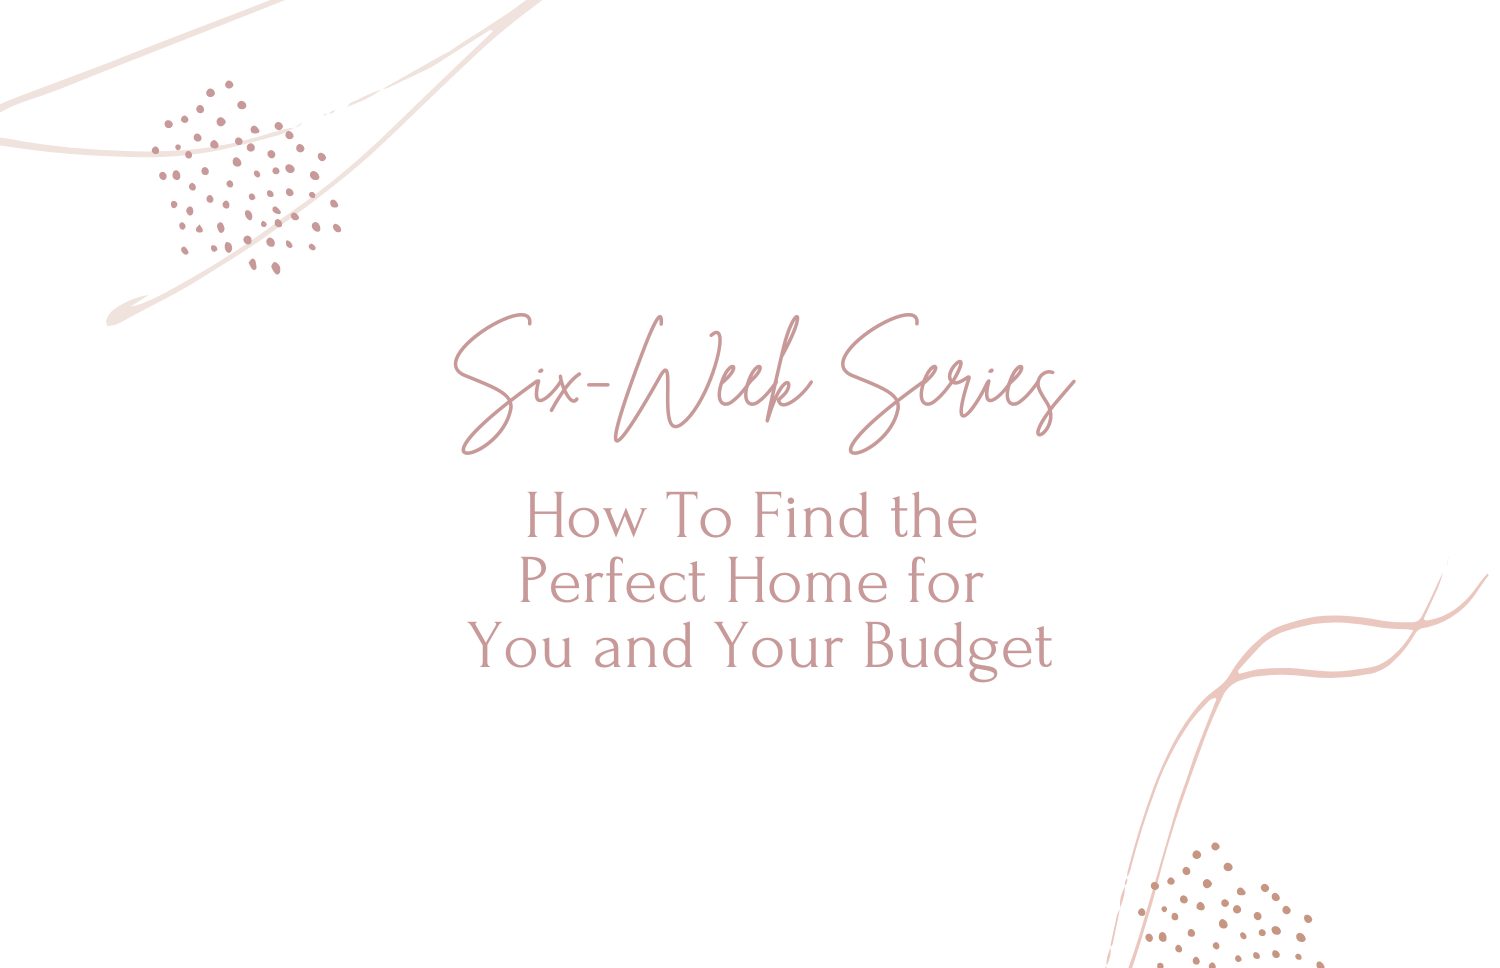 How to Find The Perfect Home for You and Your Budget